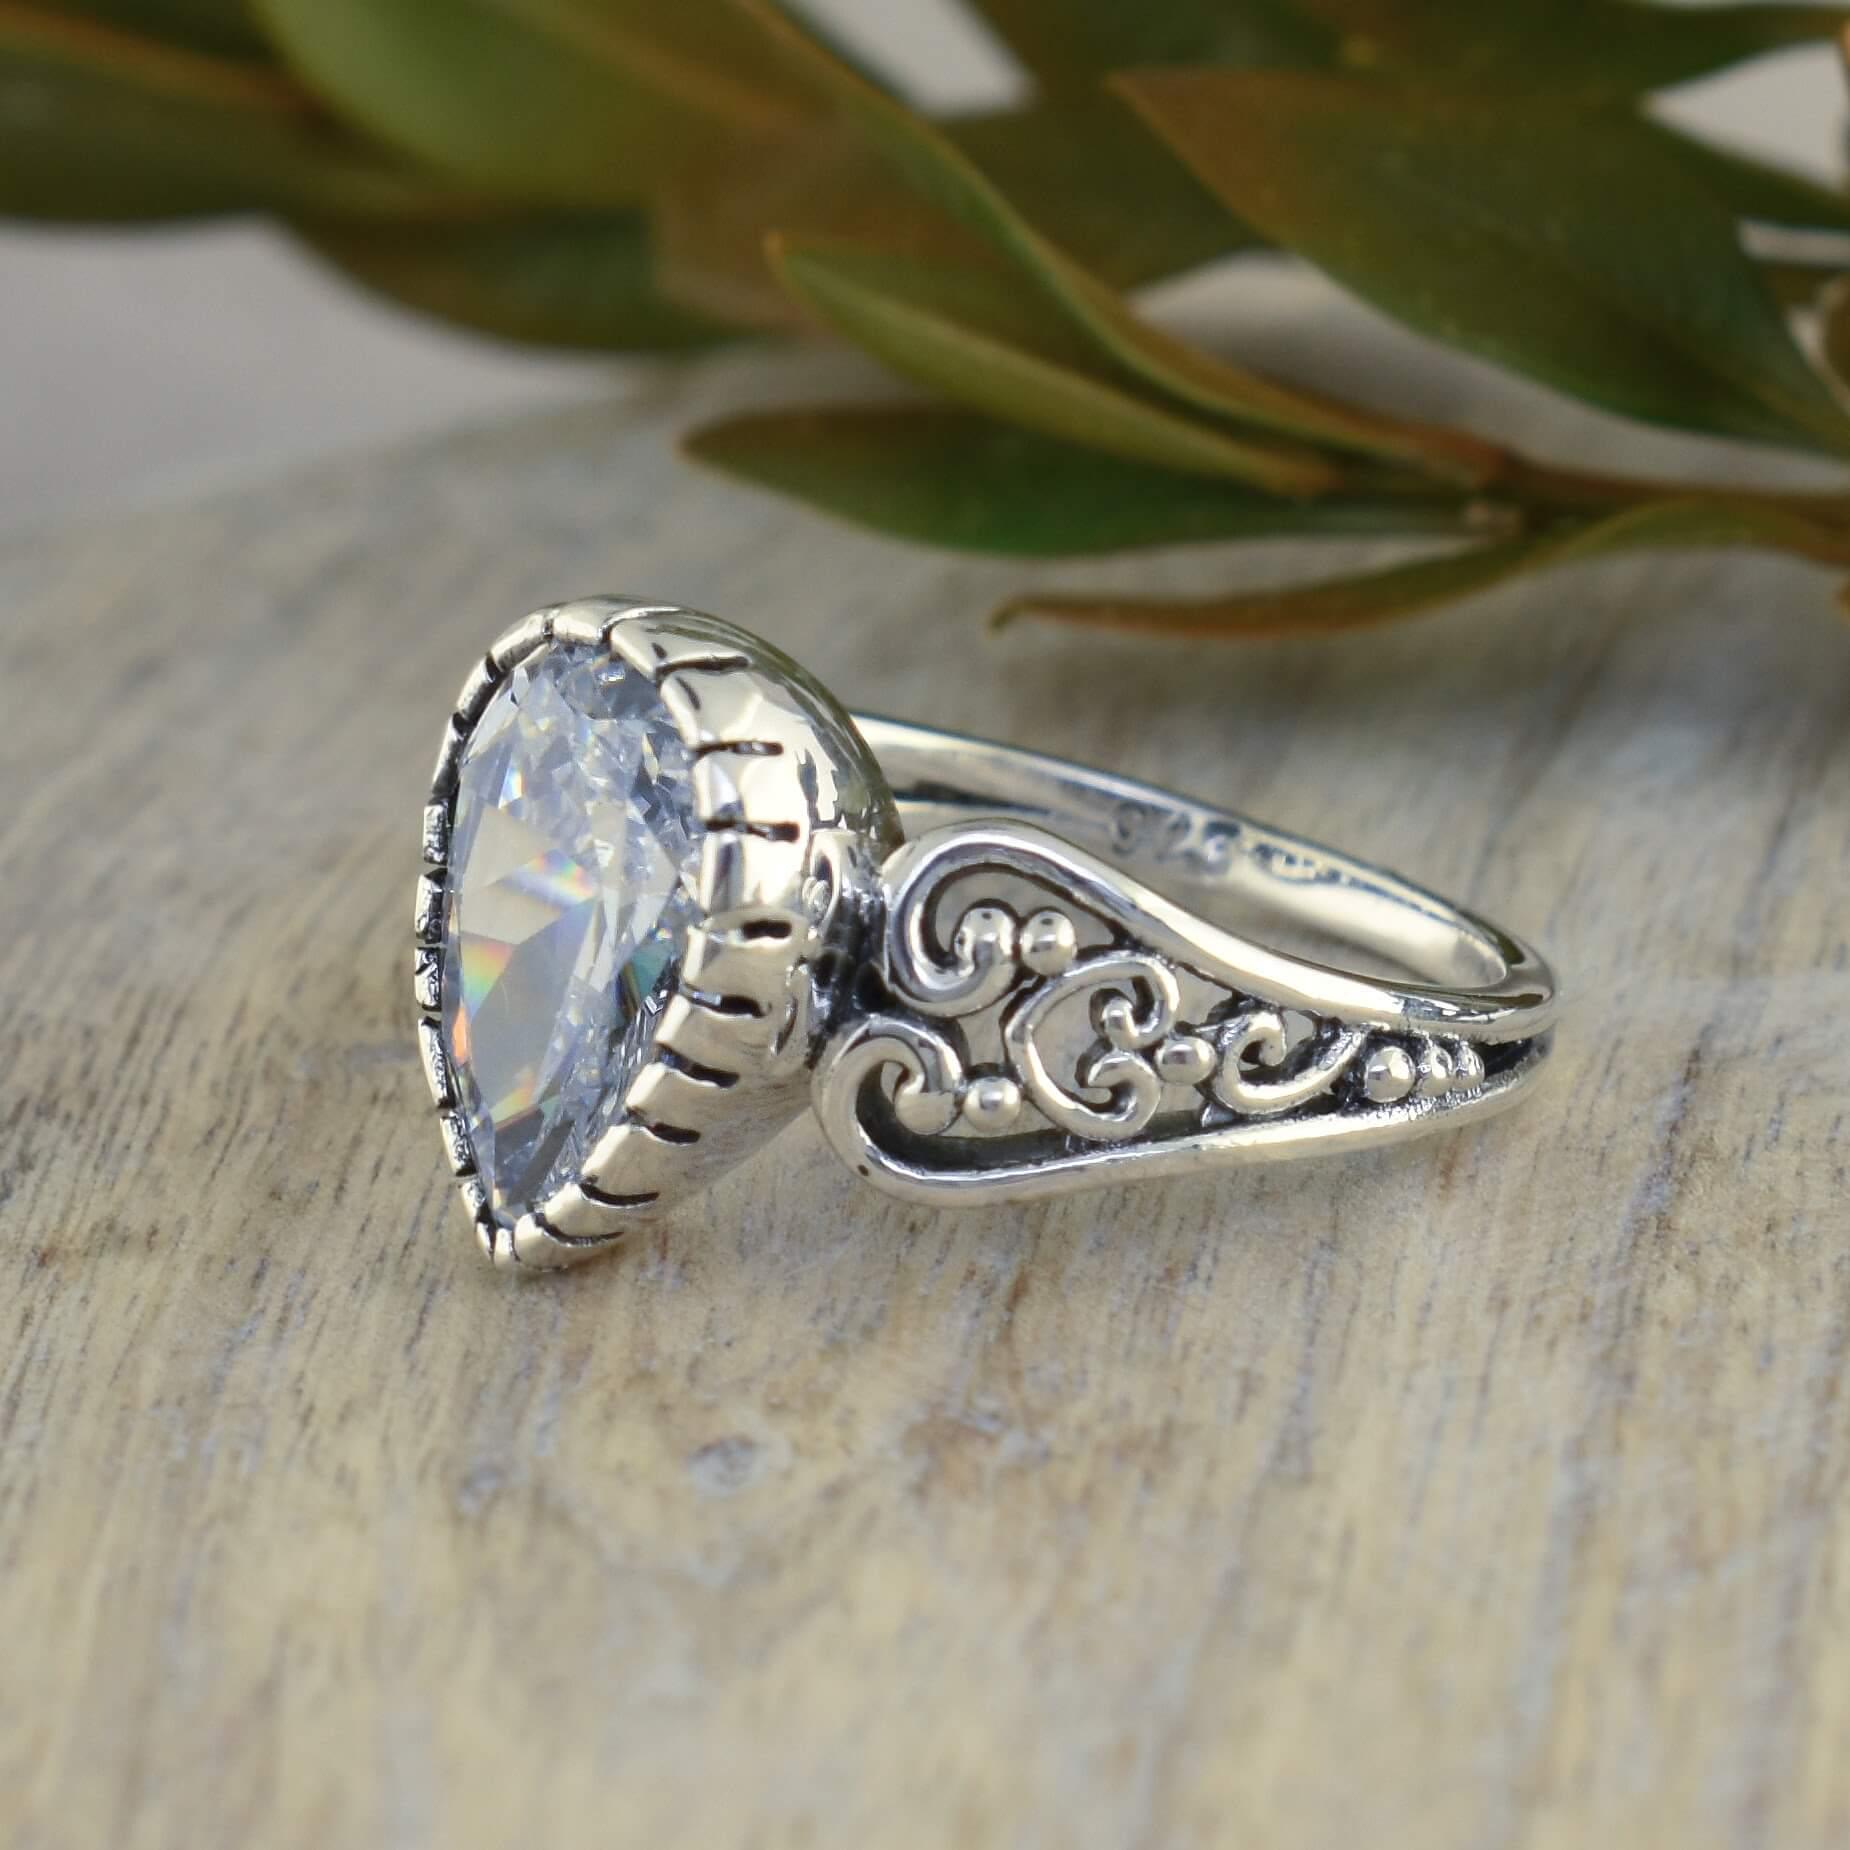 Antonia Ring with filigree styled band and center stone